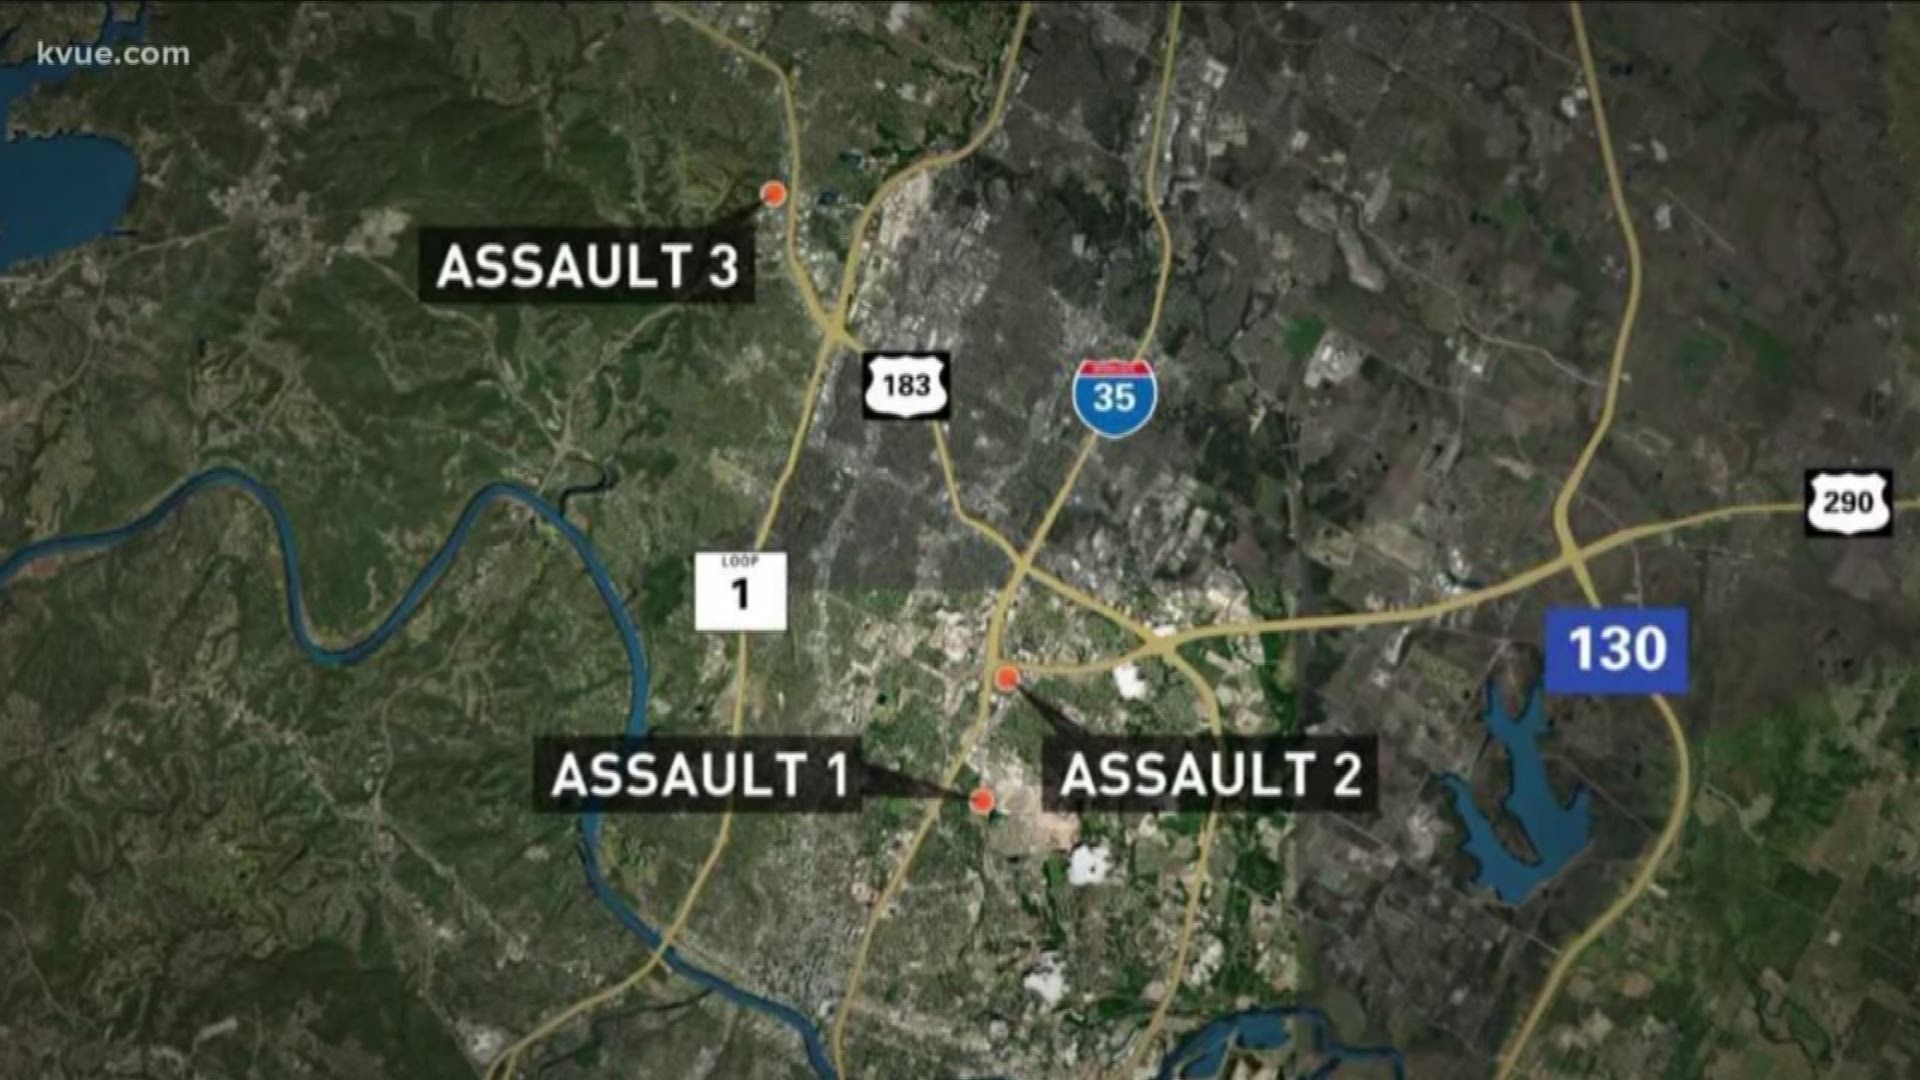 The search for a rapist continues after a woman was attacked in her Northwest Austin apartment this week.